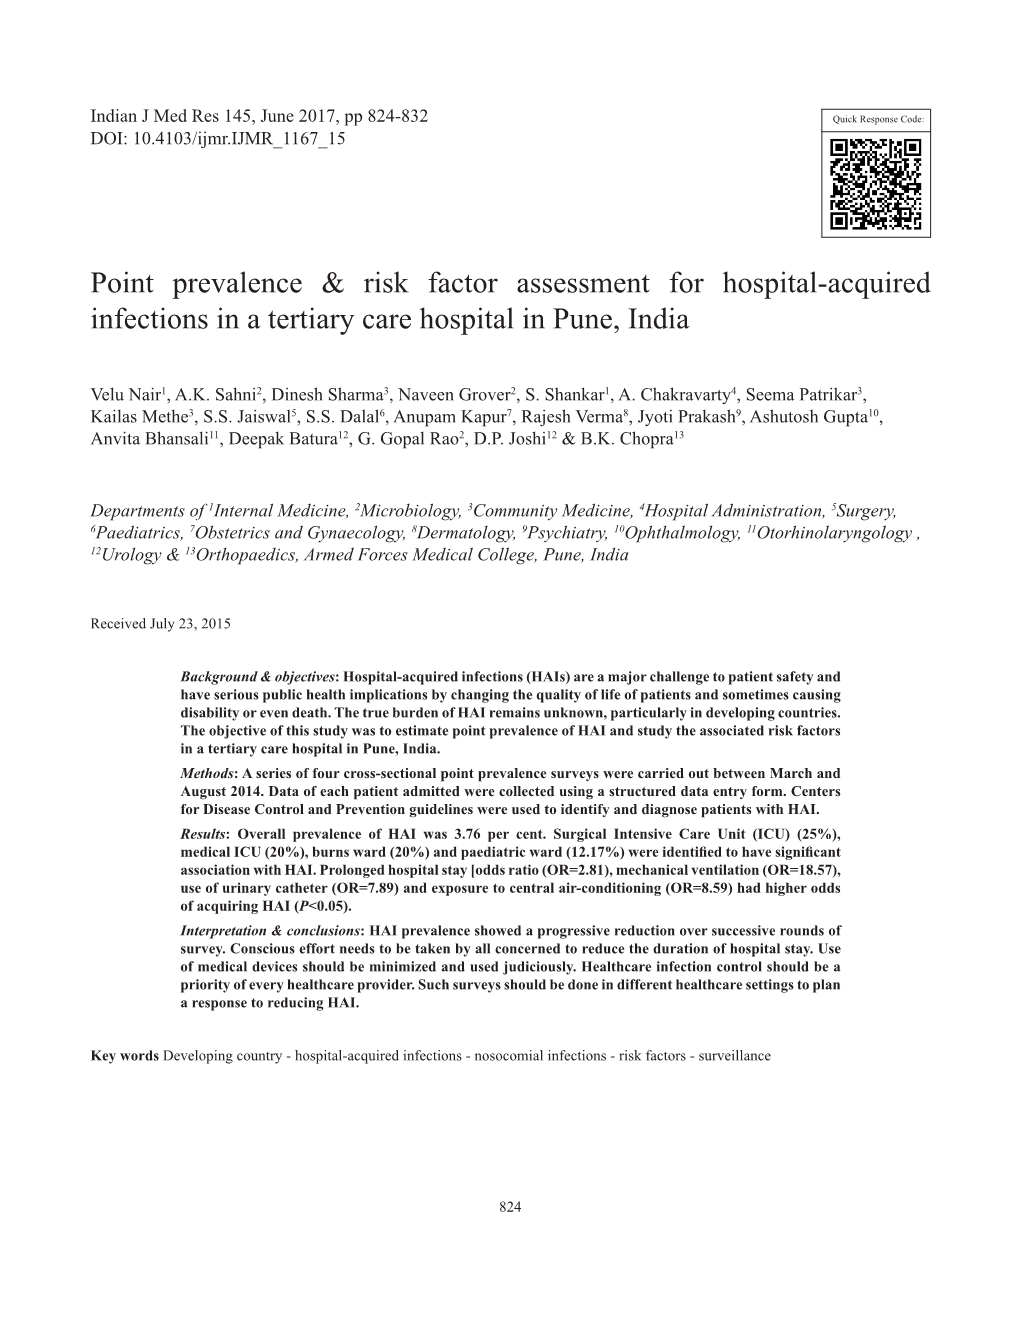 Point Prevalence & Risk Factor Assessment for Hospital-Acquired